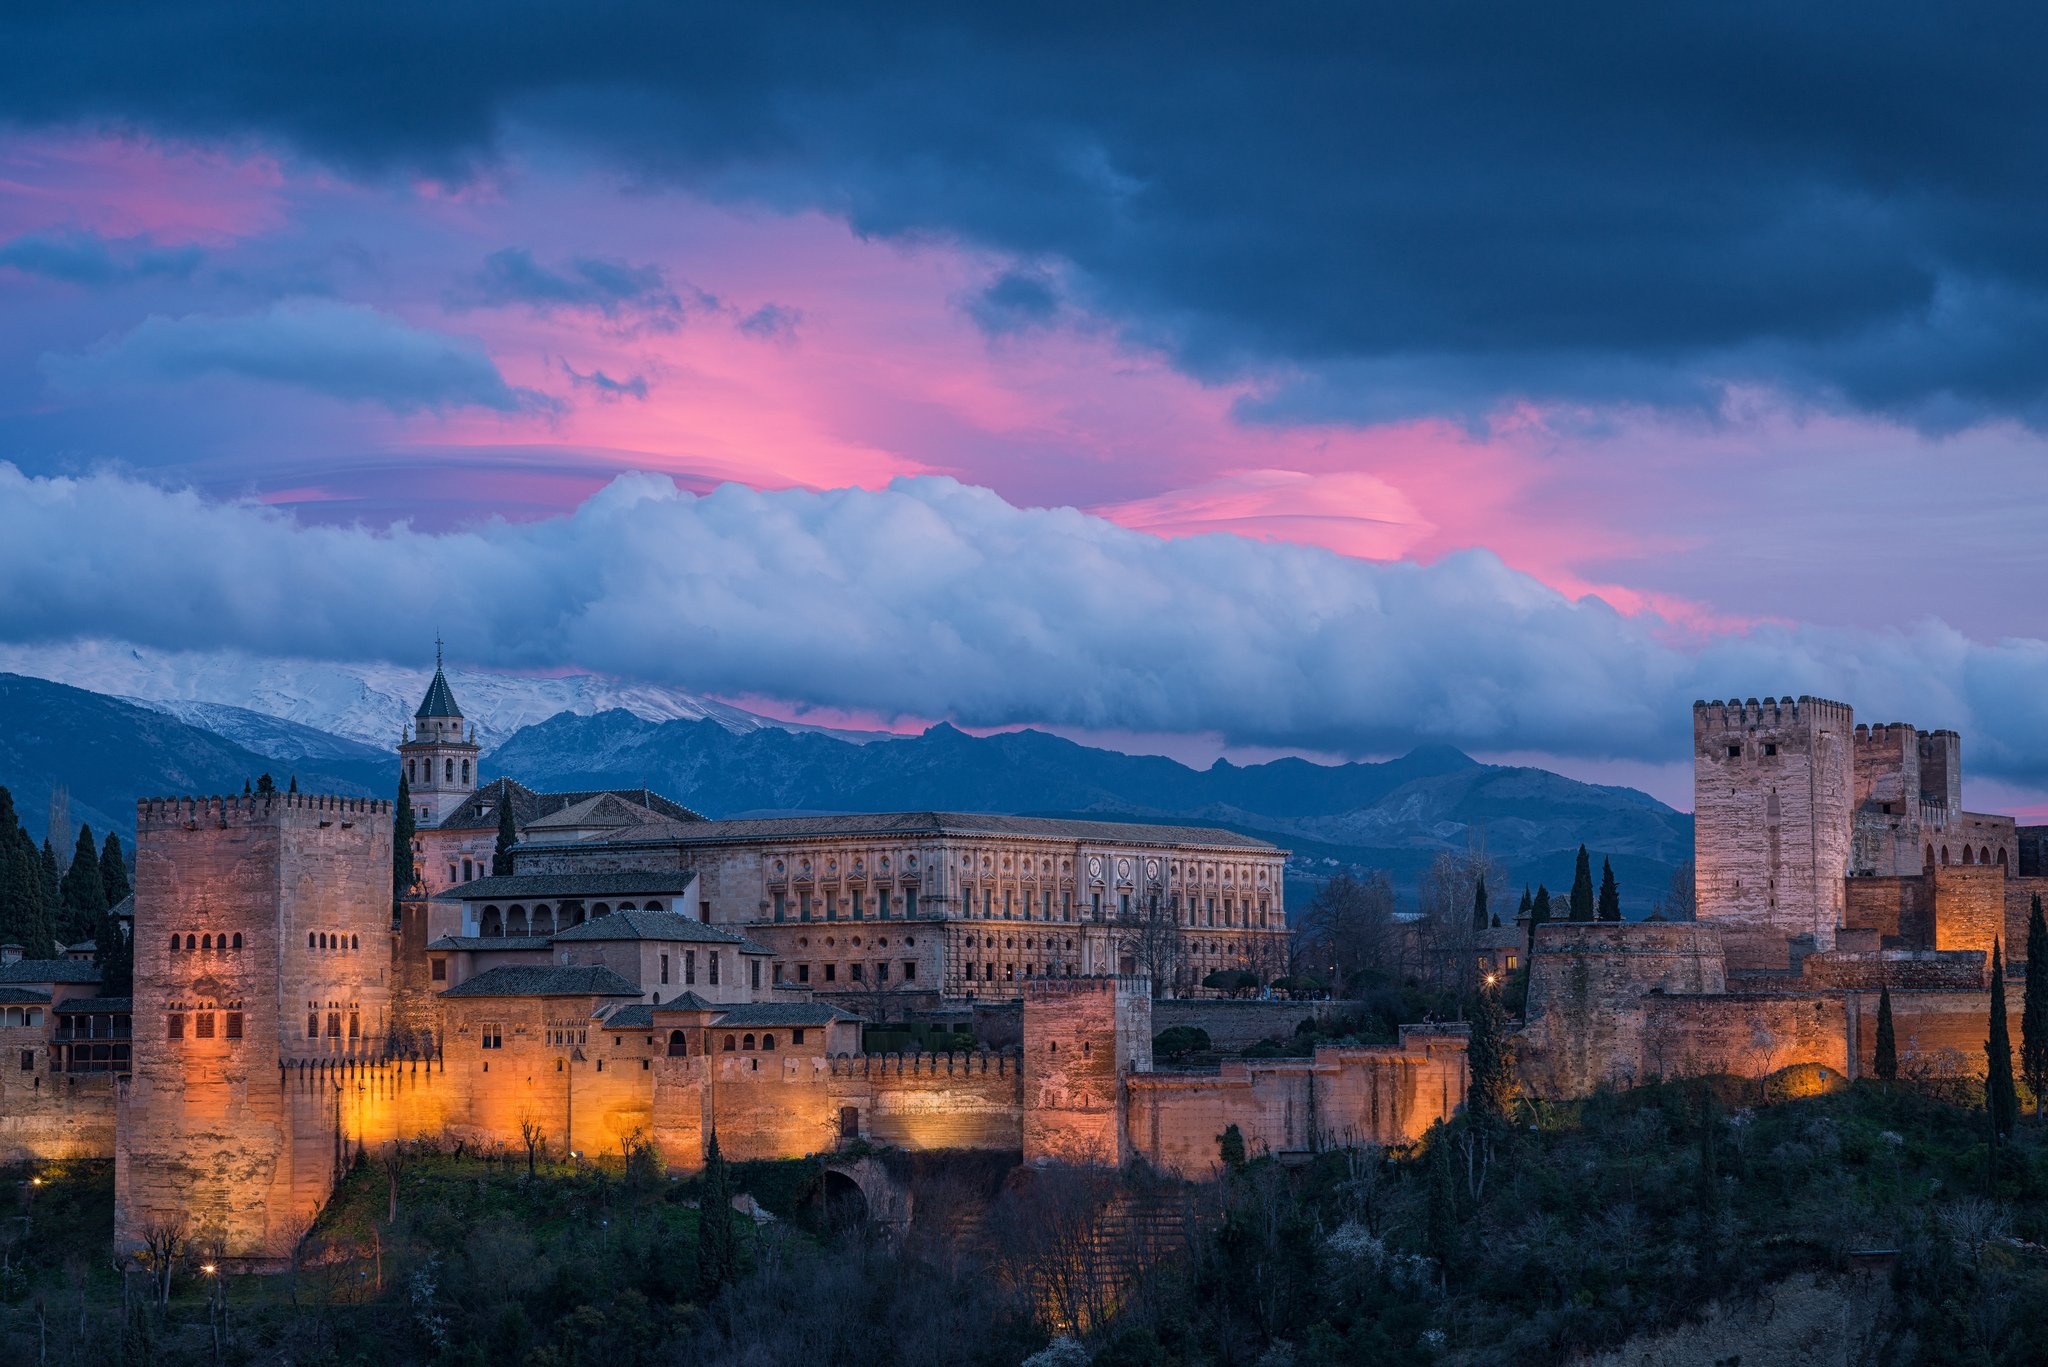 granada, Spain, Alhambra, Spain, Sky, Clouds, Mountains, Night, Sunset, Building, Monument, Lights, City Wallpaper